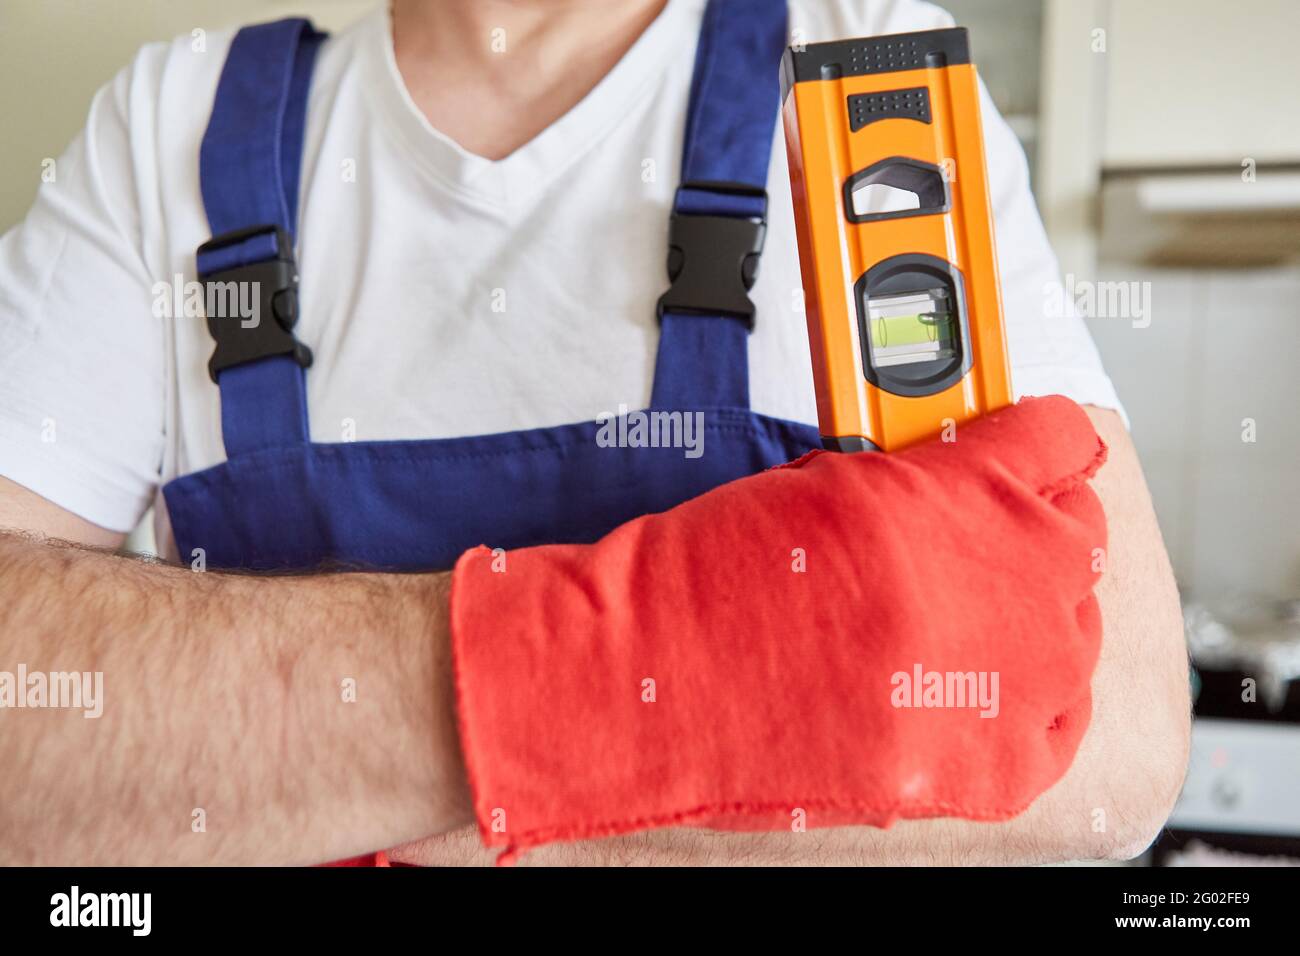 Craftsman with spirit level and gloves as a symbol of craftsmanship and precision Stock Photo